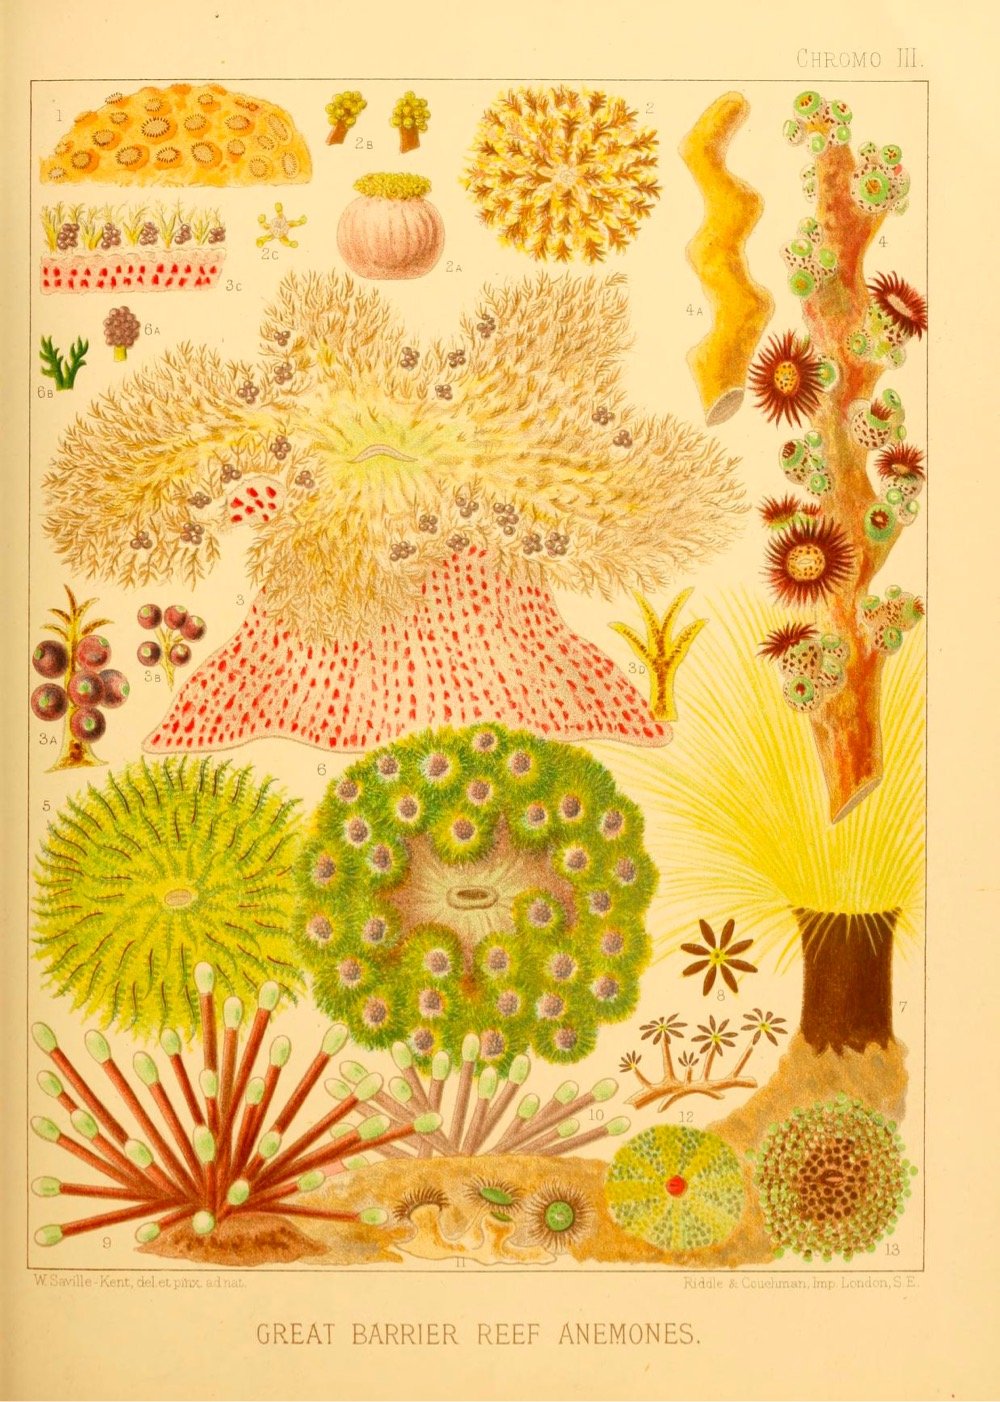 19th-Century Illustrations of the Great Barrier Reef